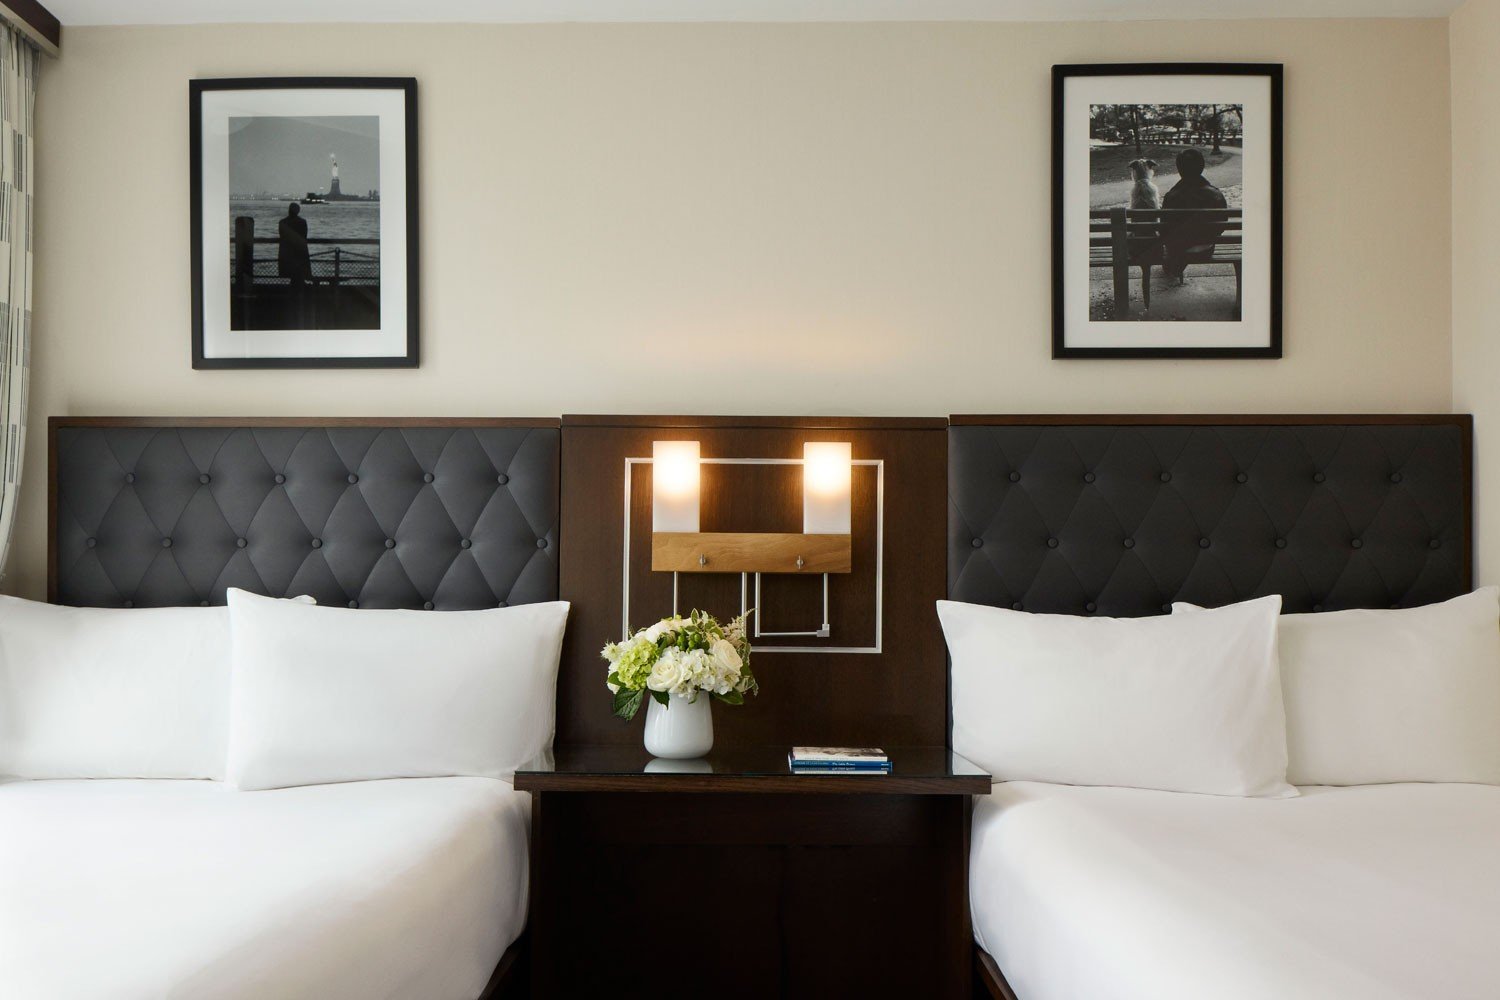 Archer Hotel New York - Double Double Guestroom headboard detail and nightlight